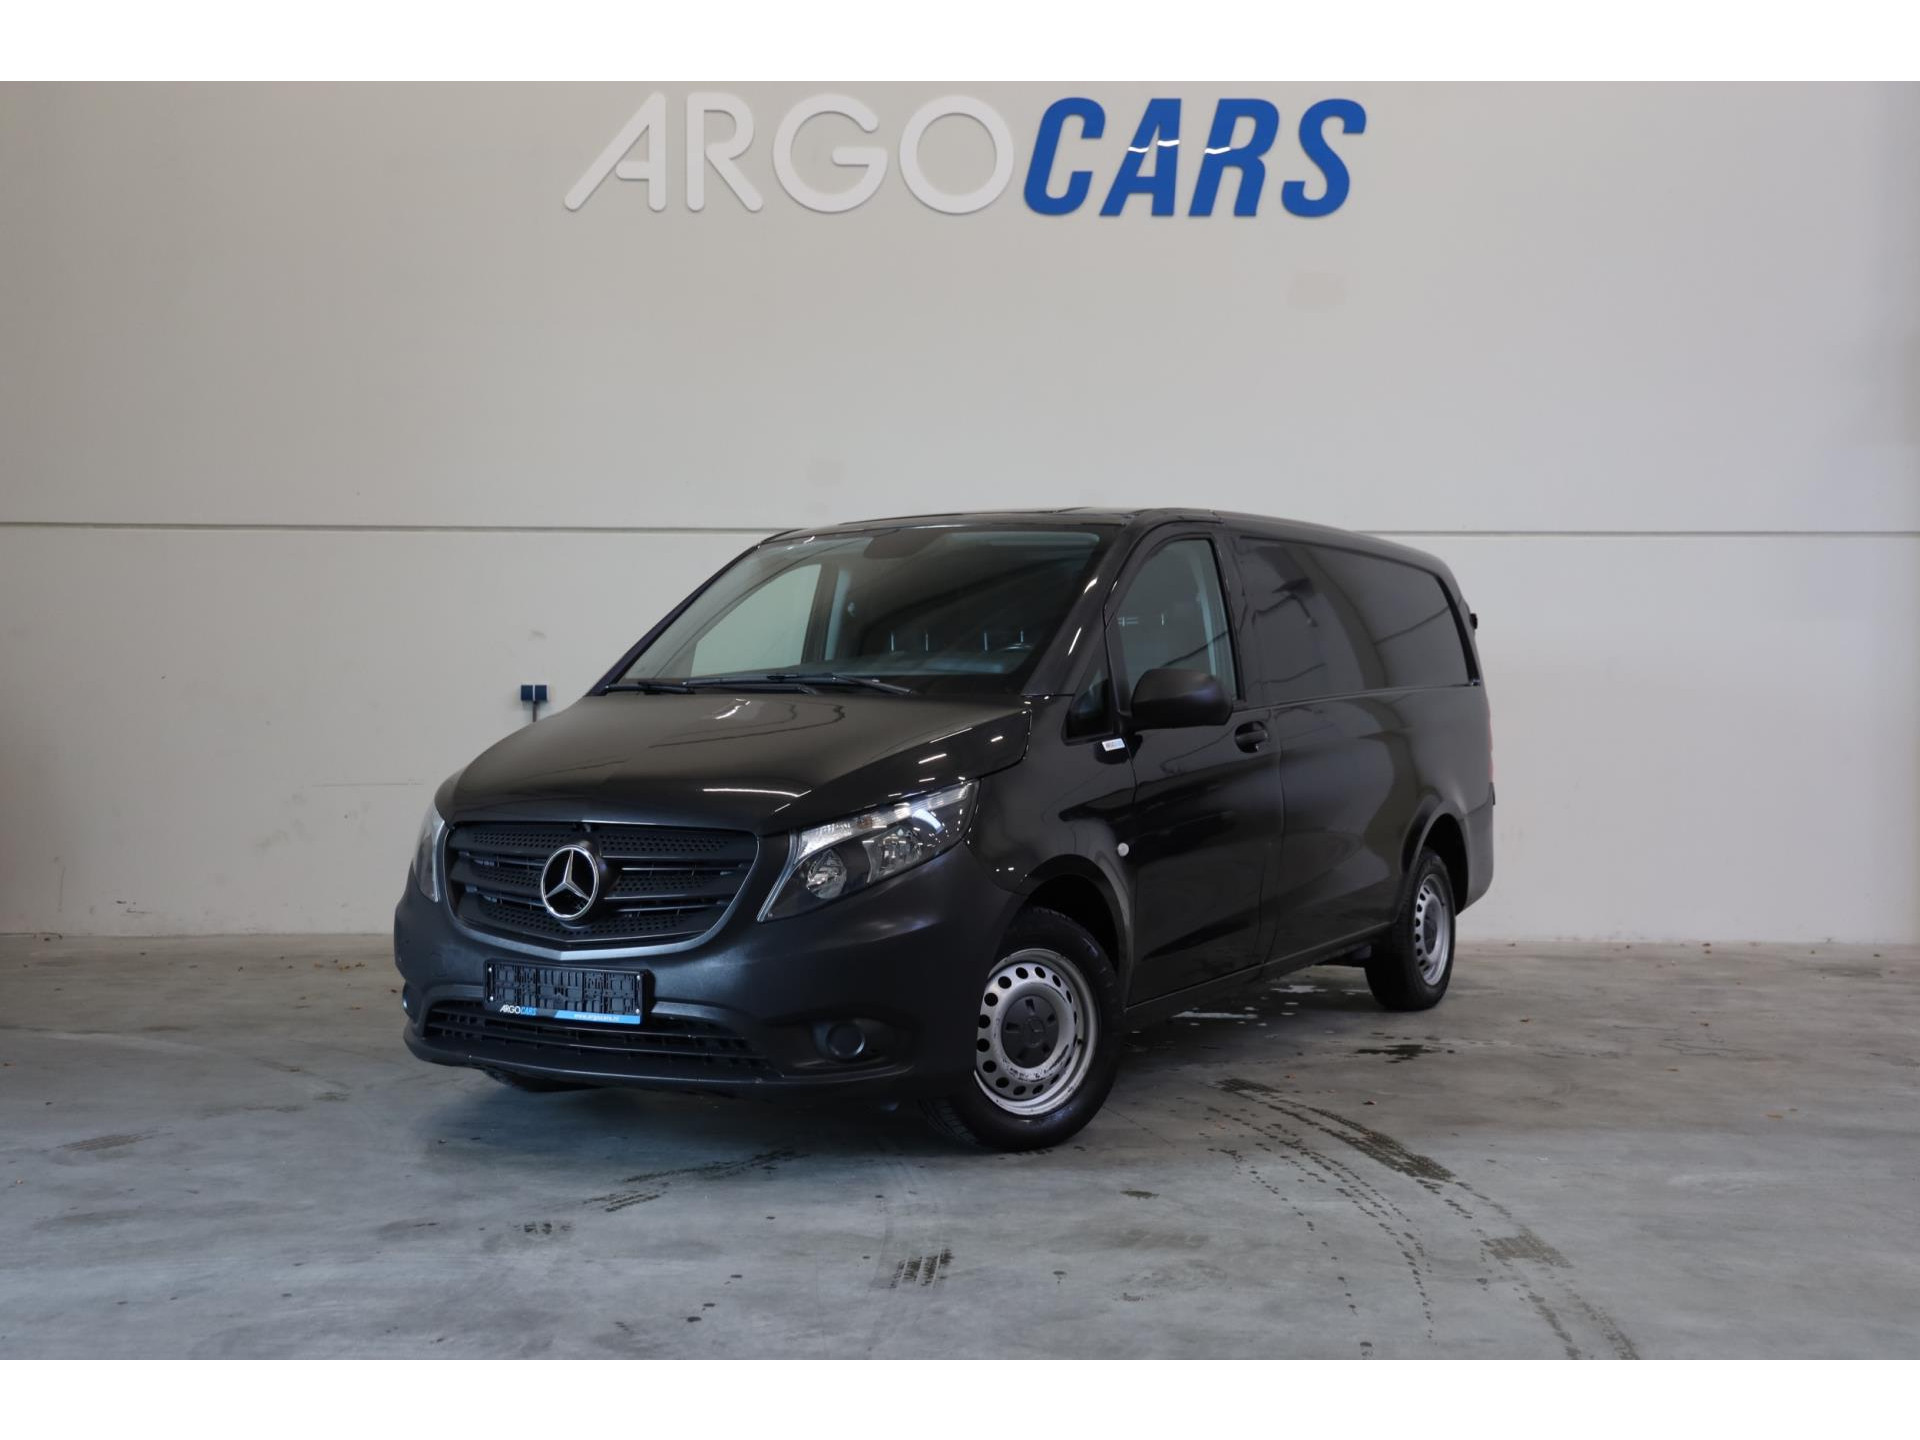 Mercedes-Benz Vito 116 CDI LANG AUTOMAAT CLIMA NAVI TREKHAAK DONKERGRIJS PDC CRUISE CONTROL LEASE V/A € 144,- P.M. Bestelauto